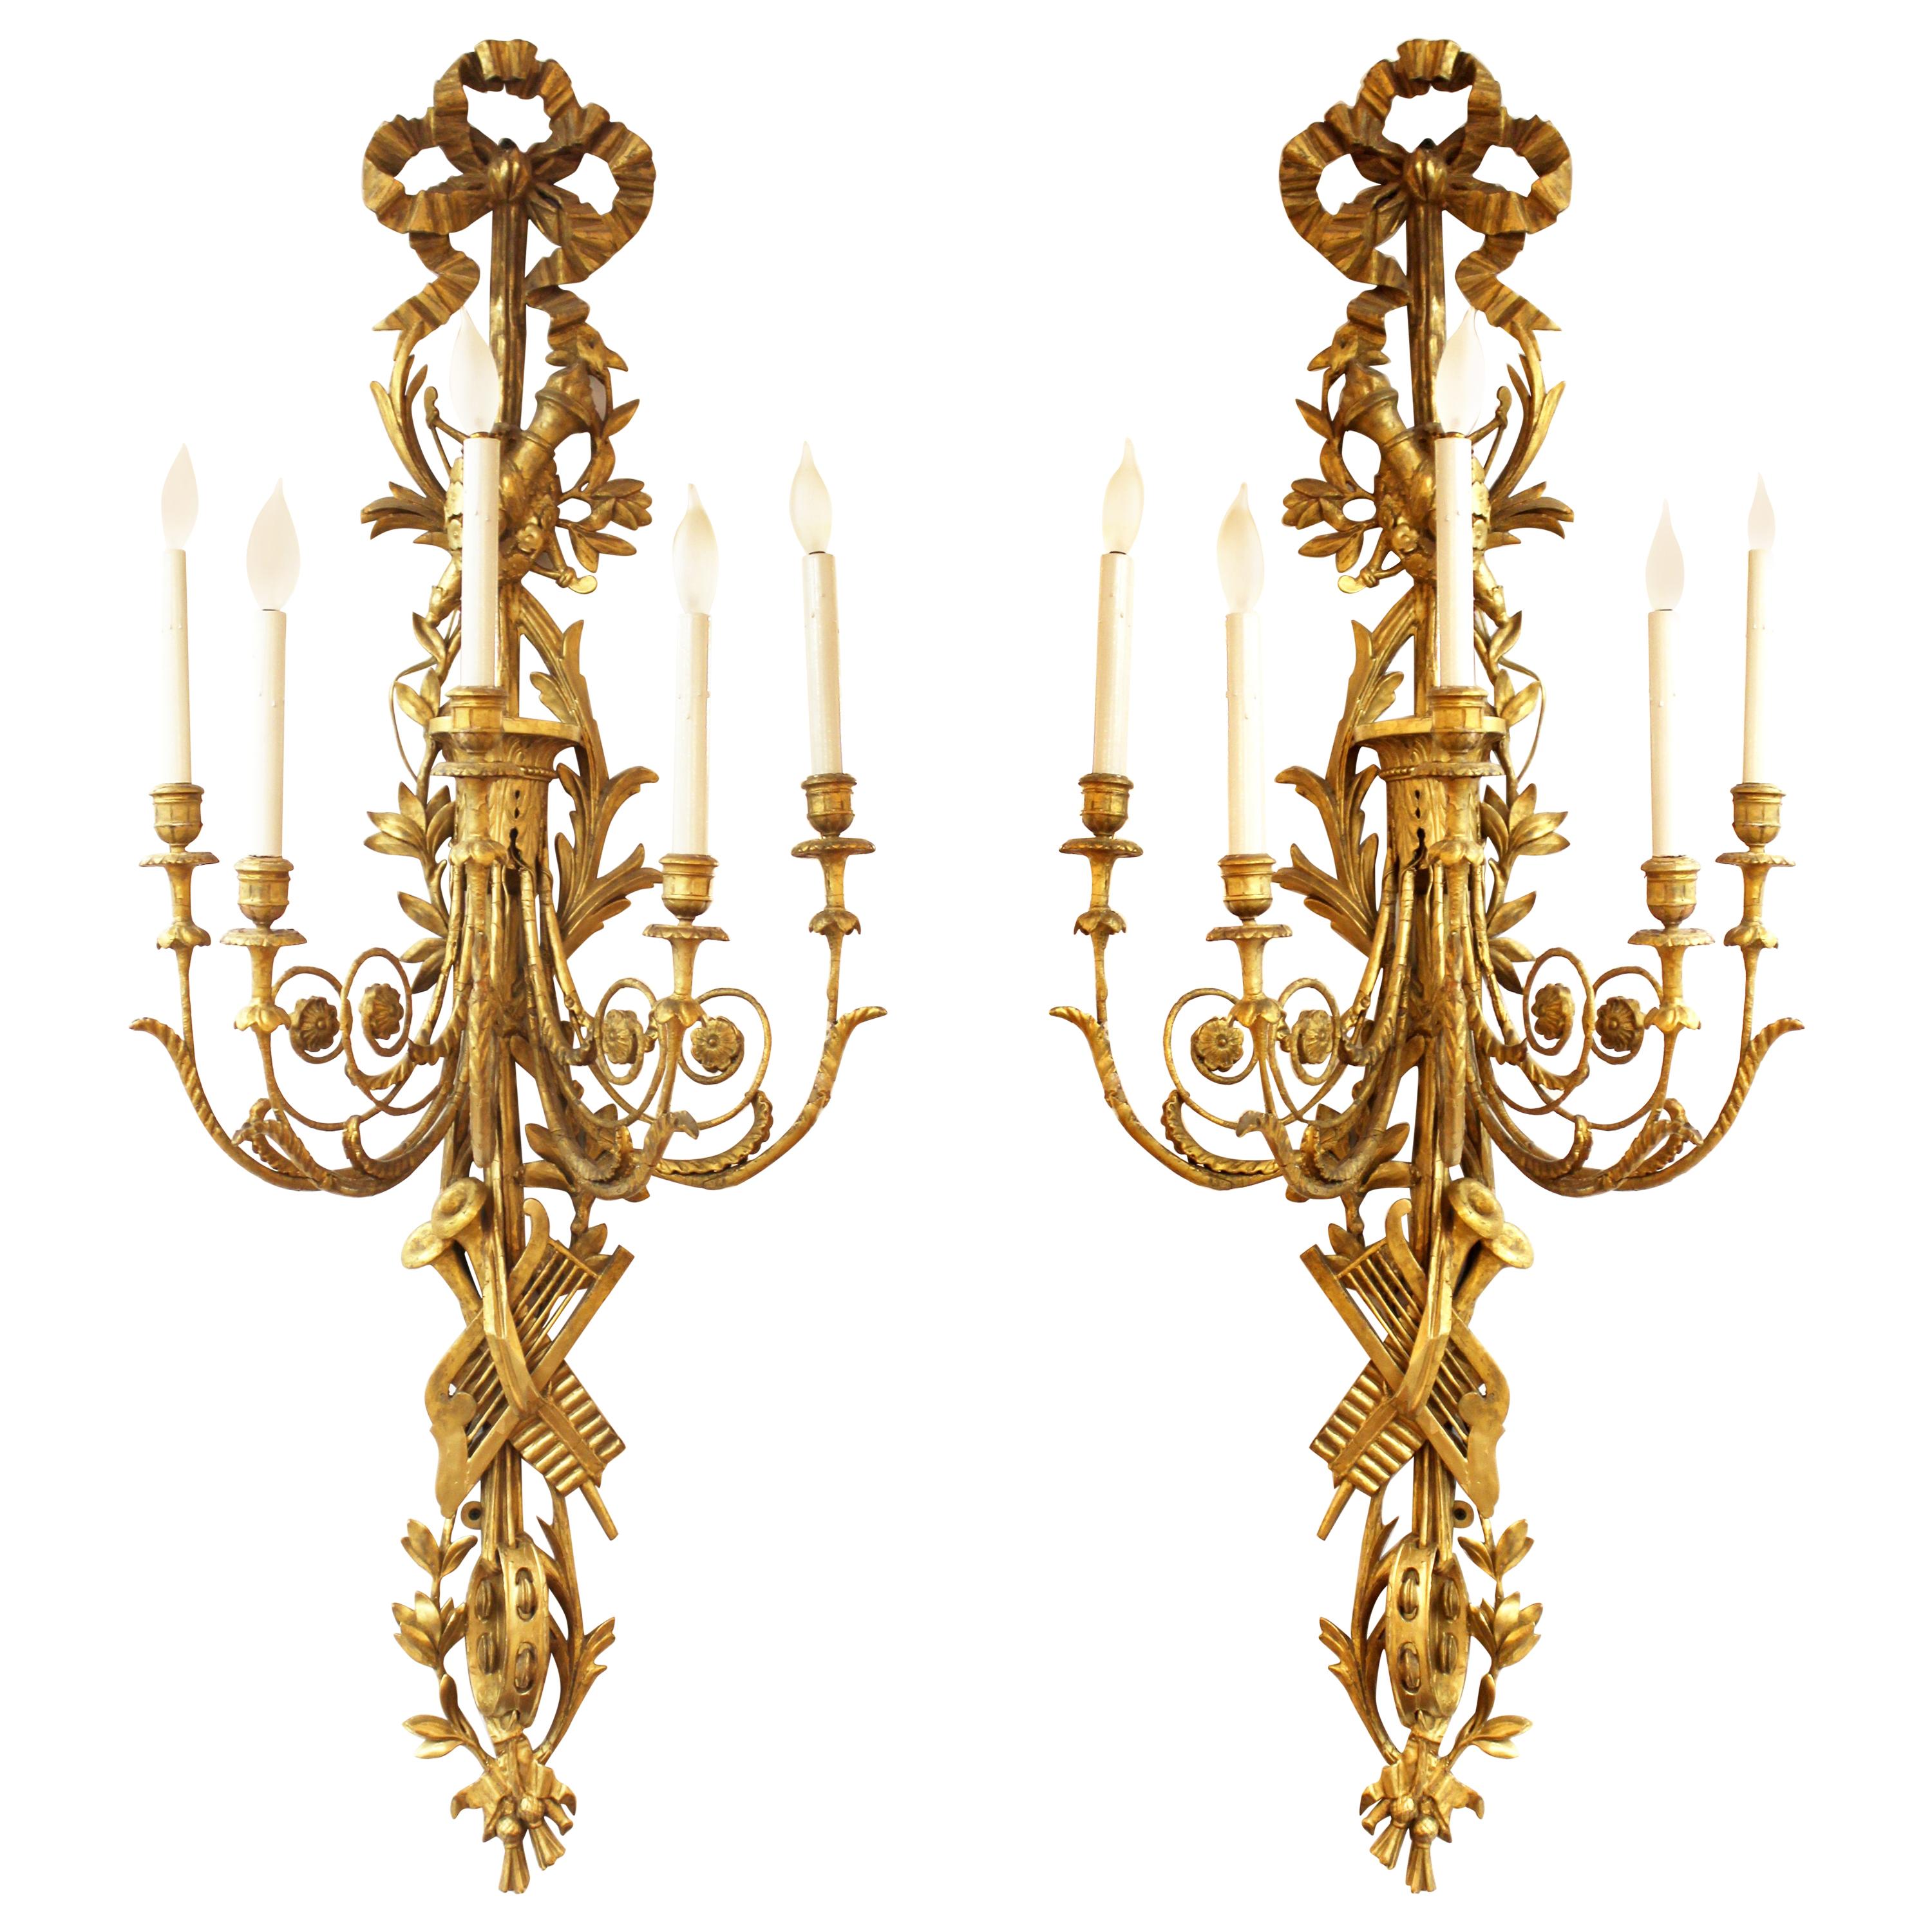 Louis XVI Neoclassical Monumental Carved Giltwood Wall Sconces with Trophies